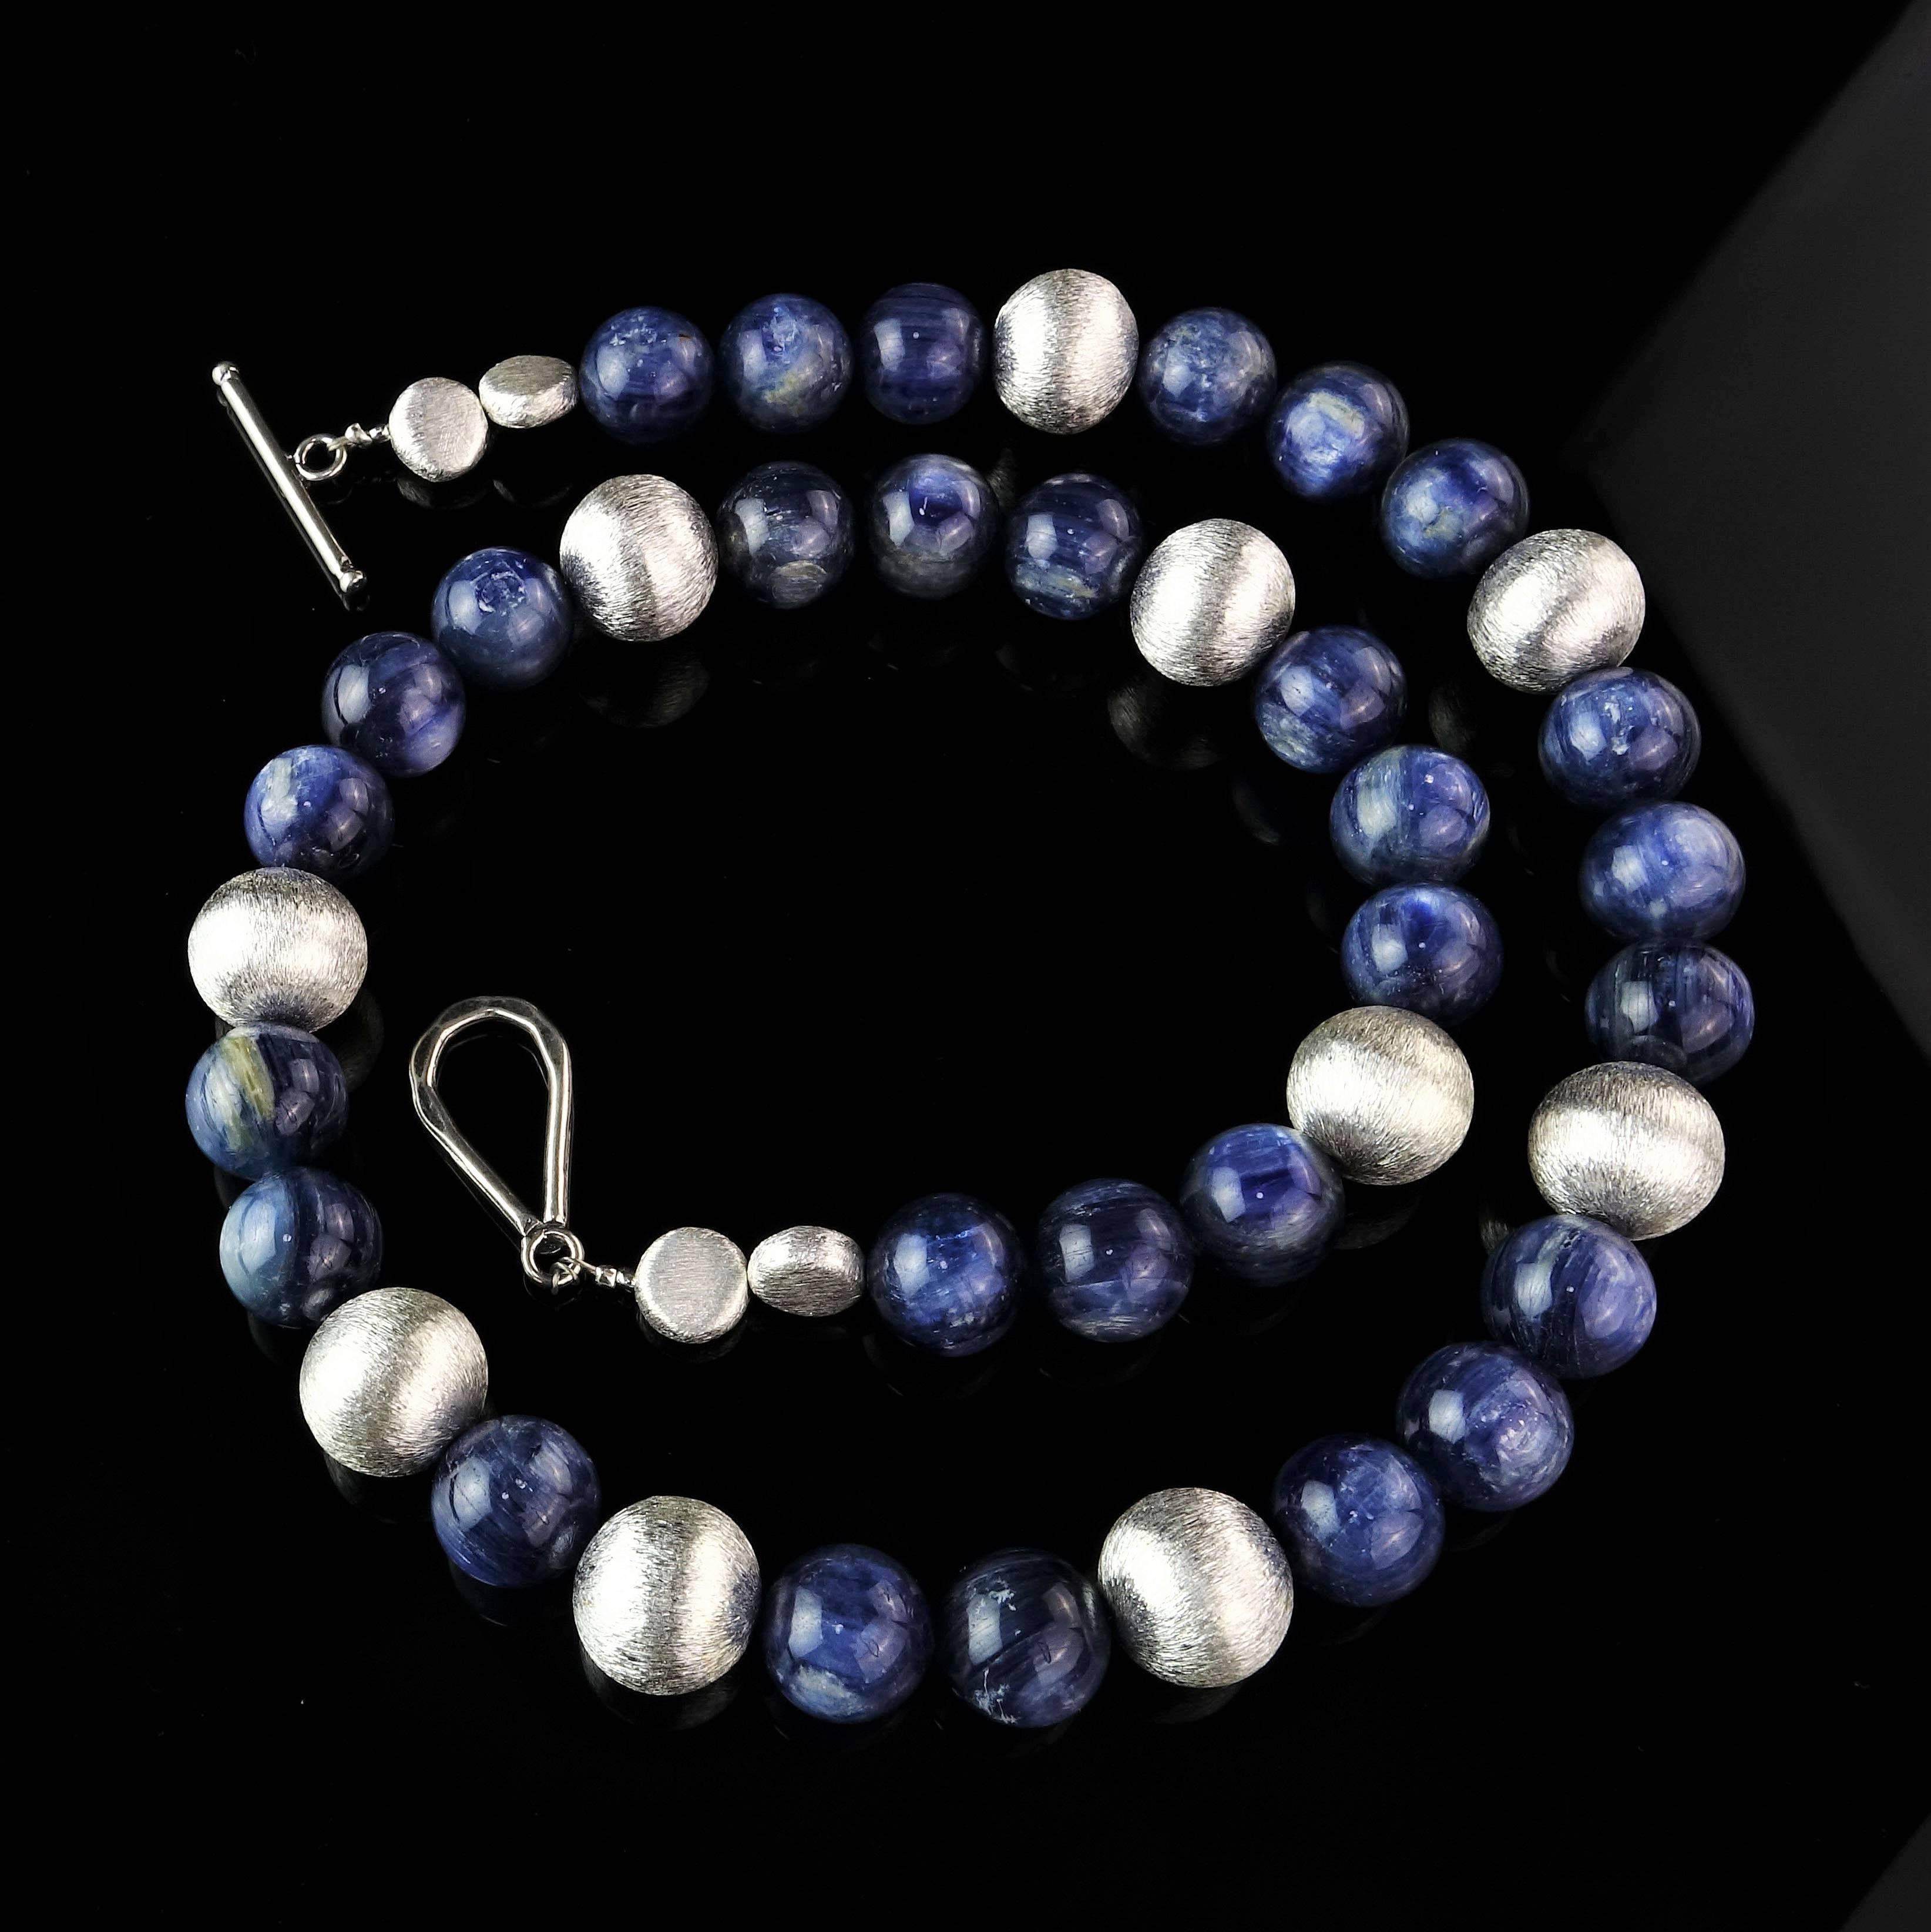 Glowing Blue, highly polished Kyanite Beads in a flowing 26 inch necklace secured with a Sterling Silver hoop clasp. These Kyanite beads are beautifully fibrous and matched with similarly fibrous silver tone beads. Wear this necklace everywhere and